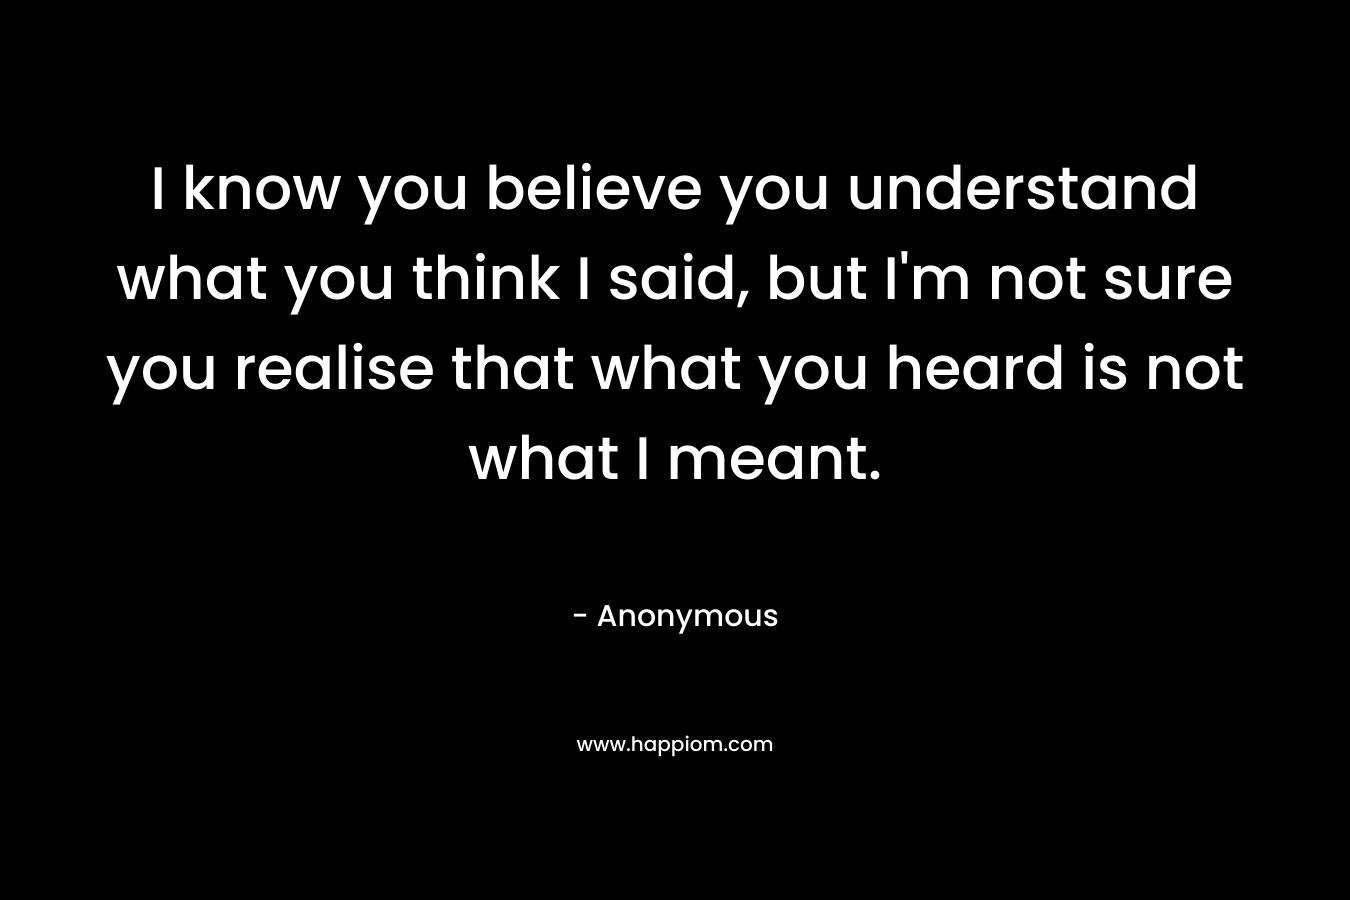 I know you believe you understand what you think I said, but I’m not sure you realise that what you heard is not what I meant. – Anonymous